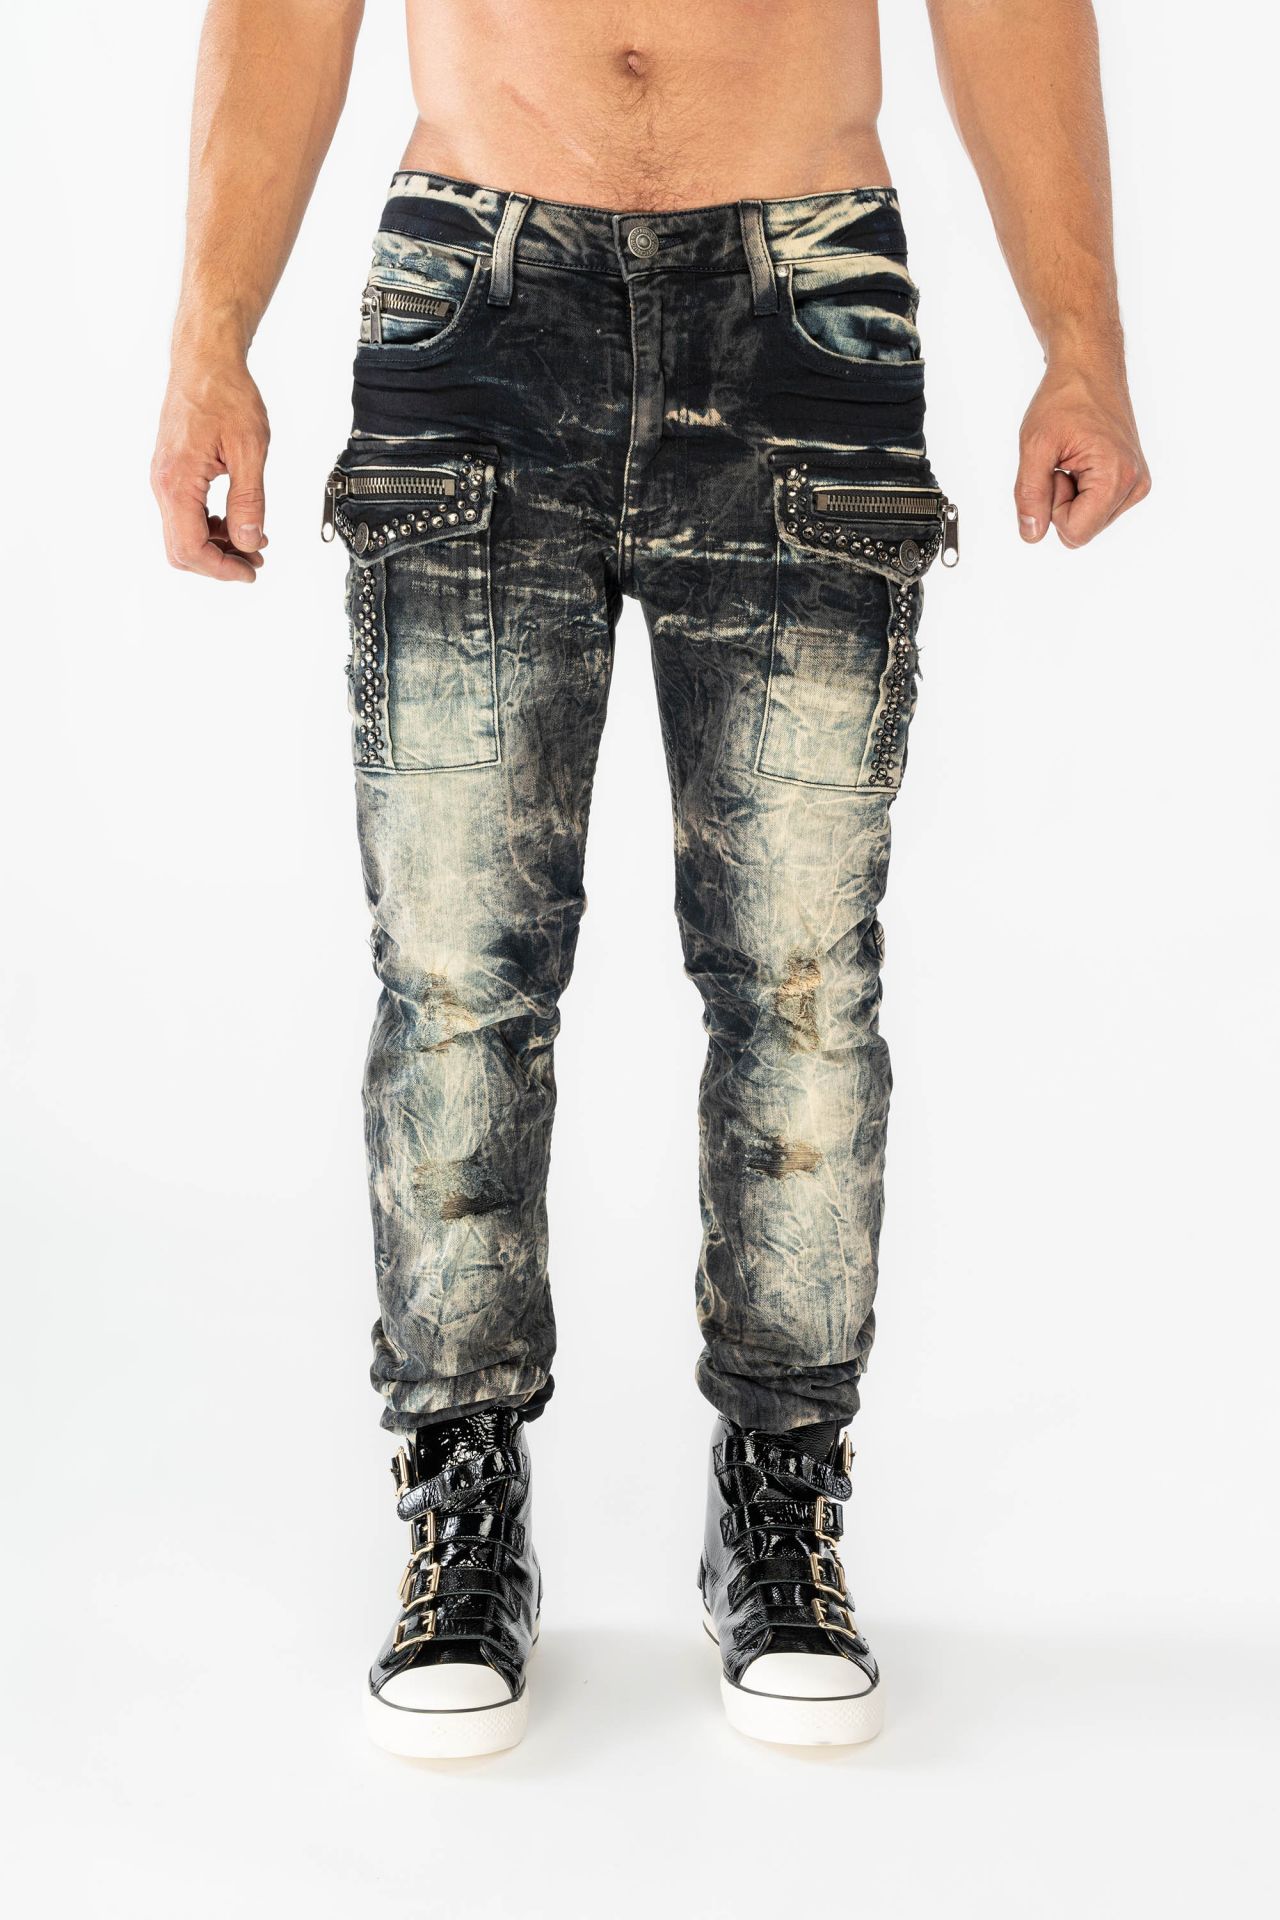 Black Anti Fit Military Jeans with Crystals